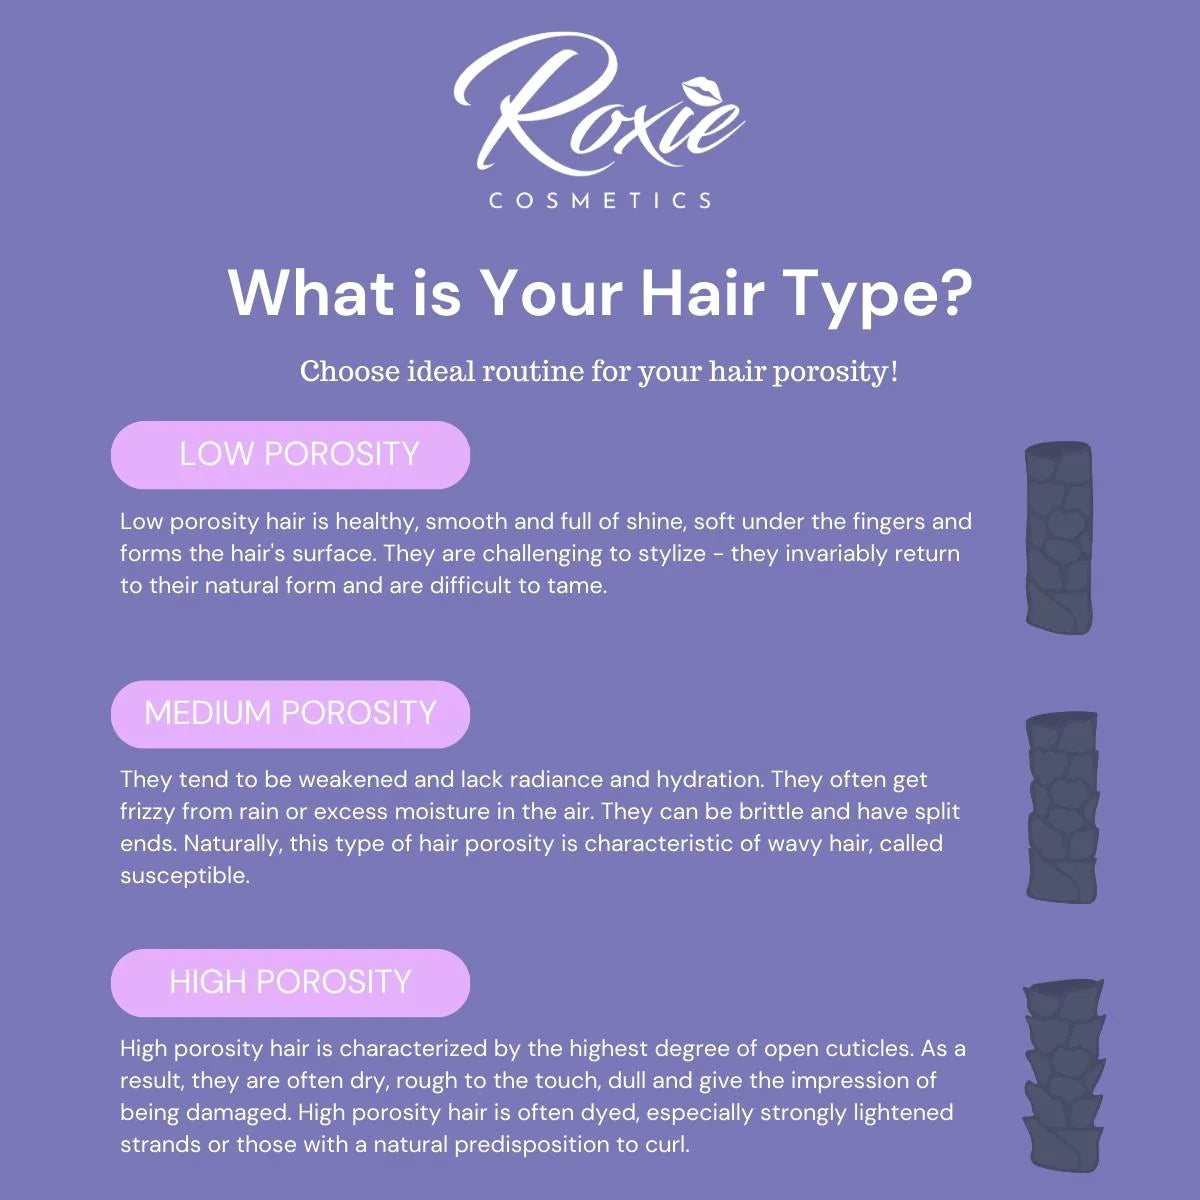 what is your hair porosity?